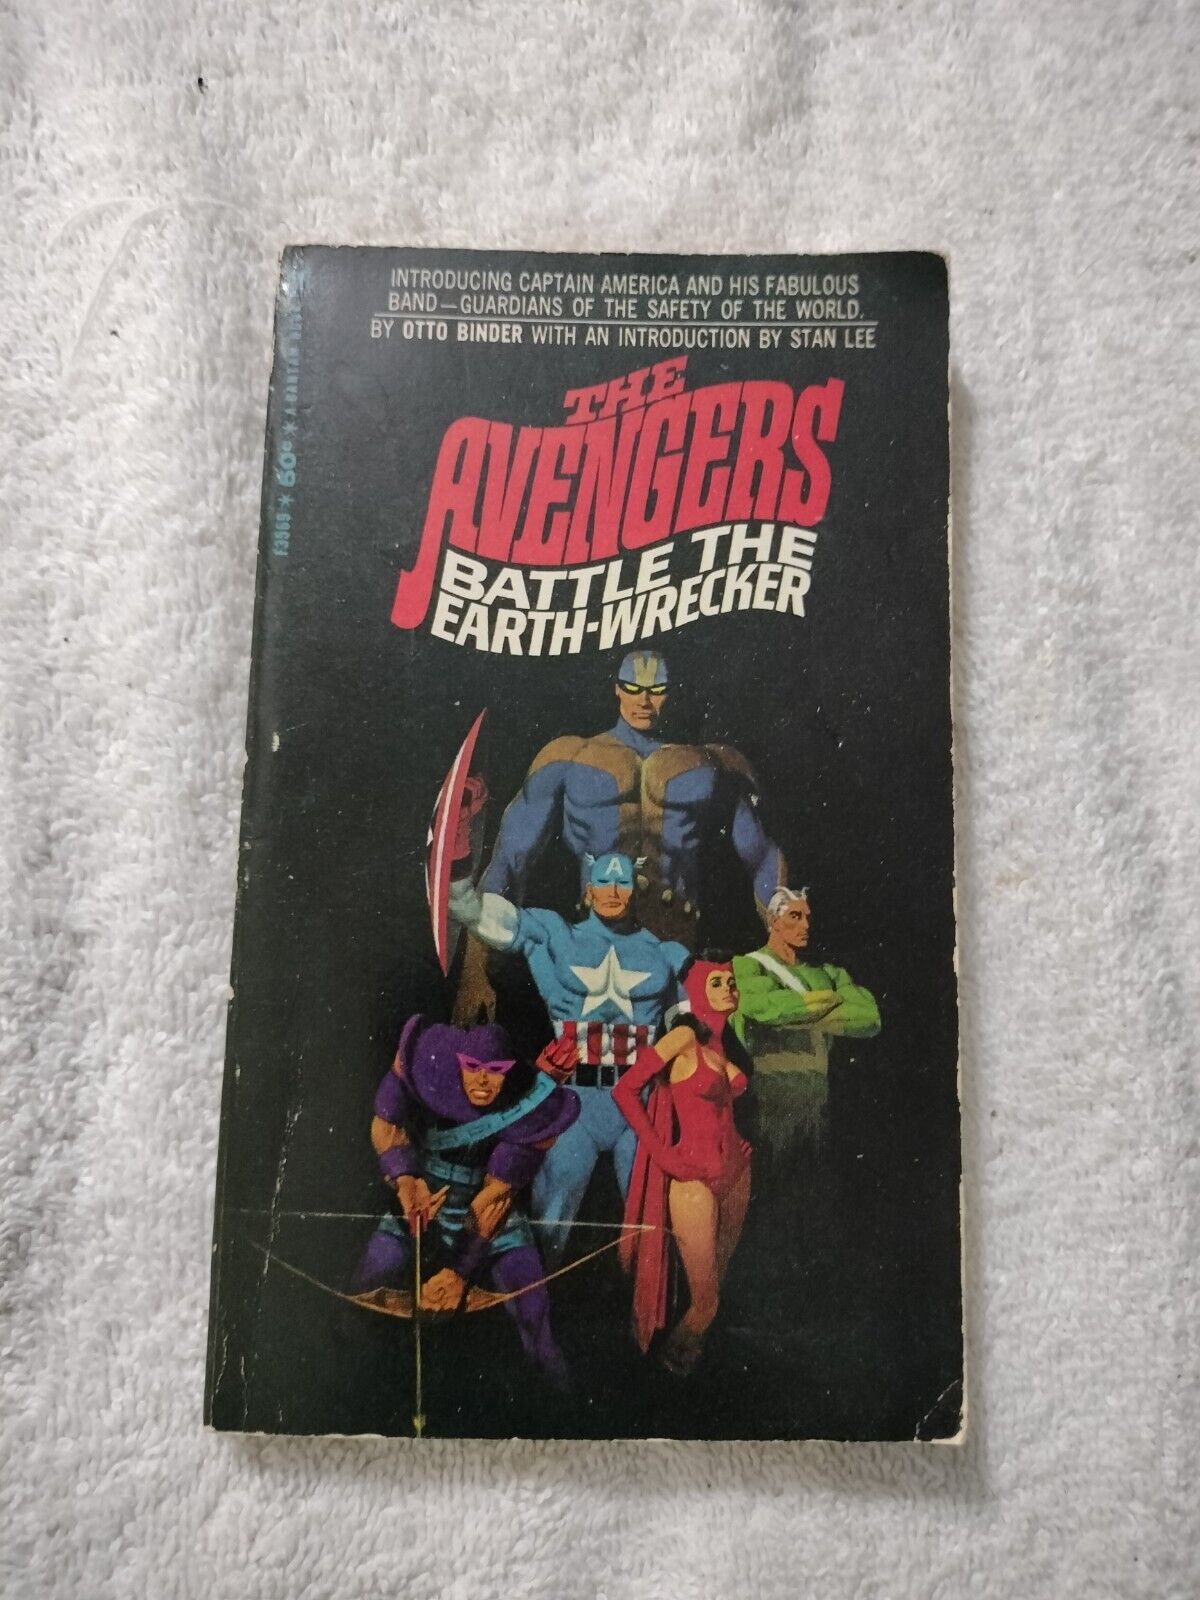 1967 The Avengers Battle The Earth-Wrecker Otto Binder Softcover Book Marvel 